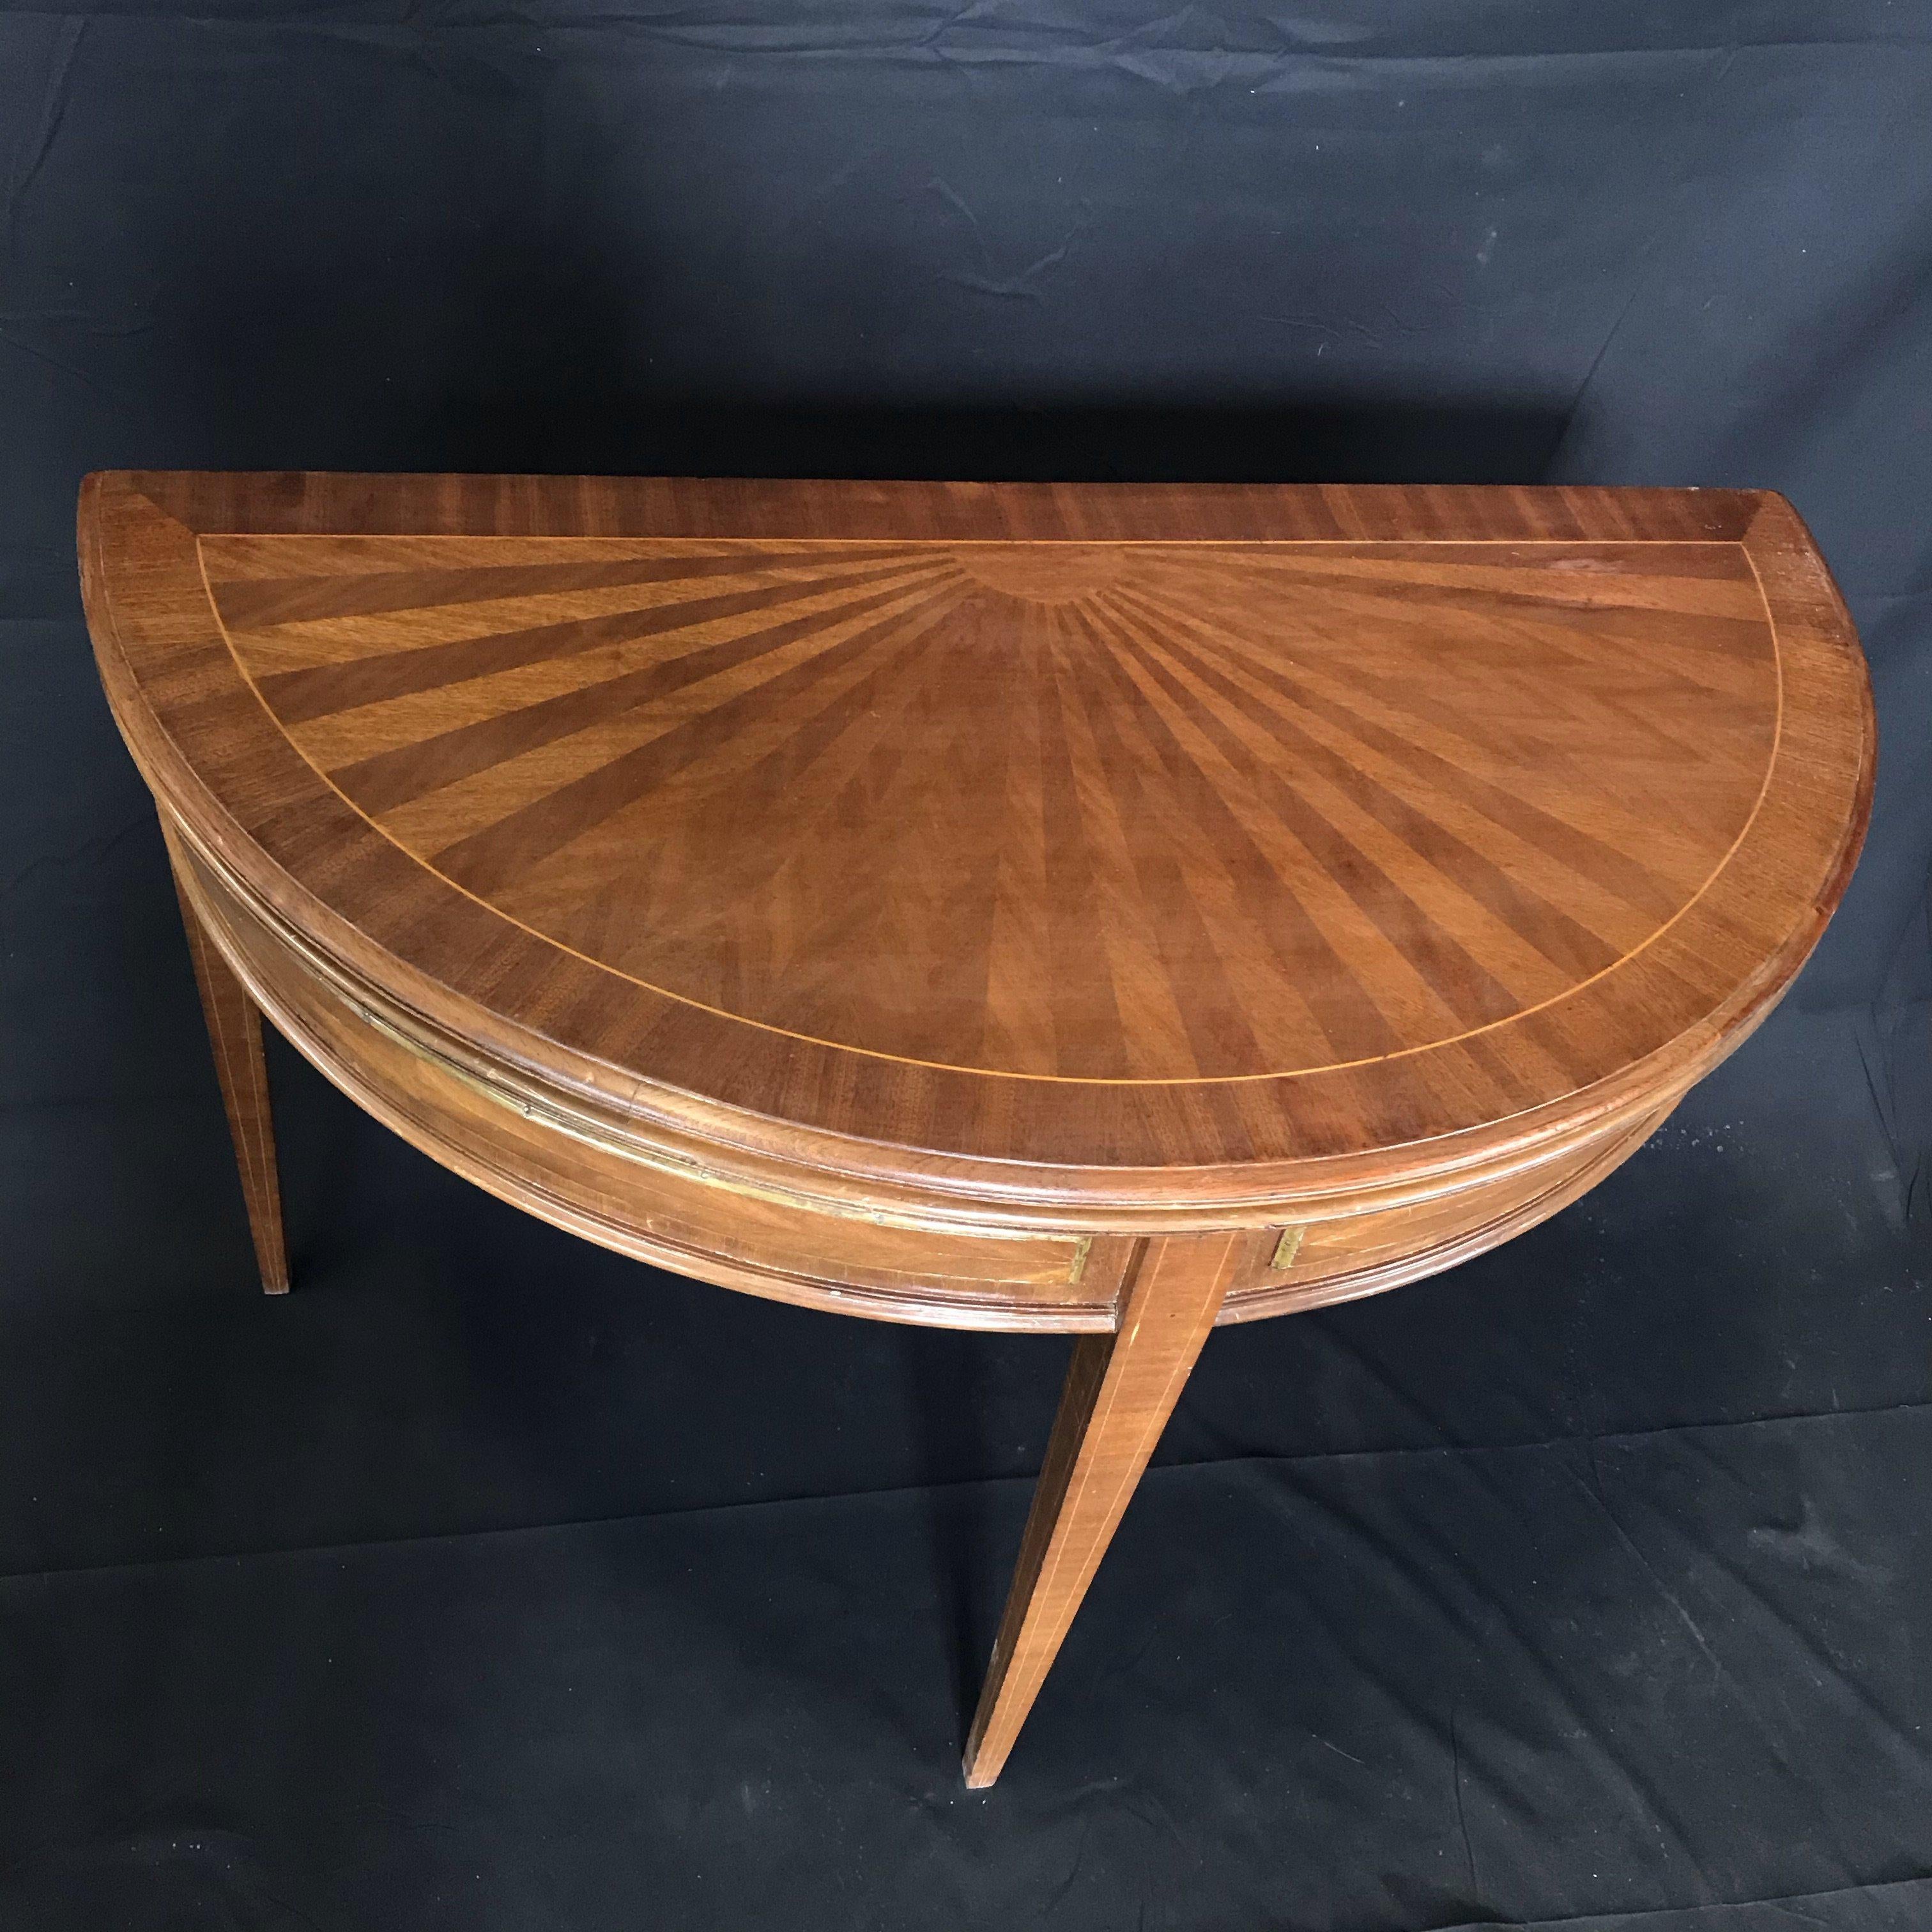 French walnut demilune table or game table when closed 40.75 W 20.75 D. There is a beautiful sunburst pattern inlaid on the top. When open table is round with 40.75 diameter and has an embossed leather interior surface and brass striping on the